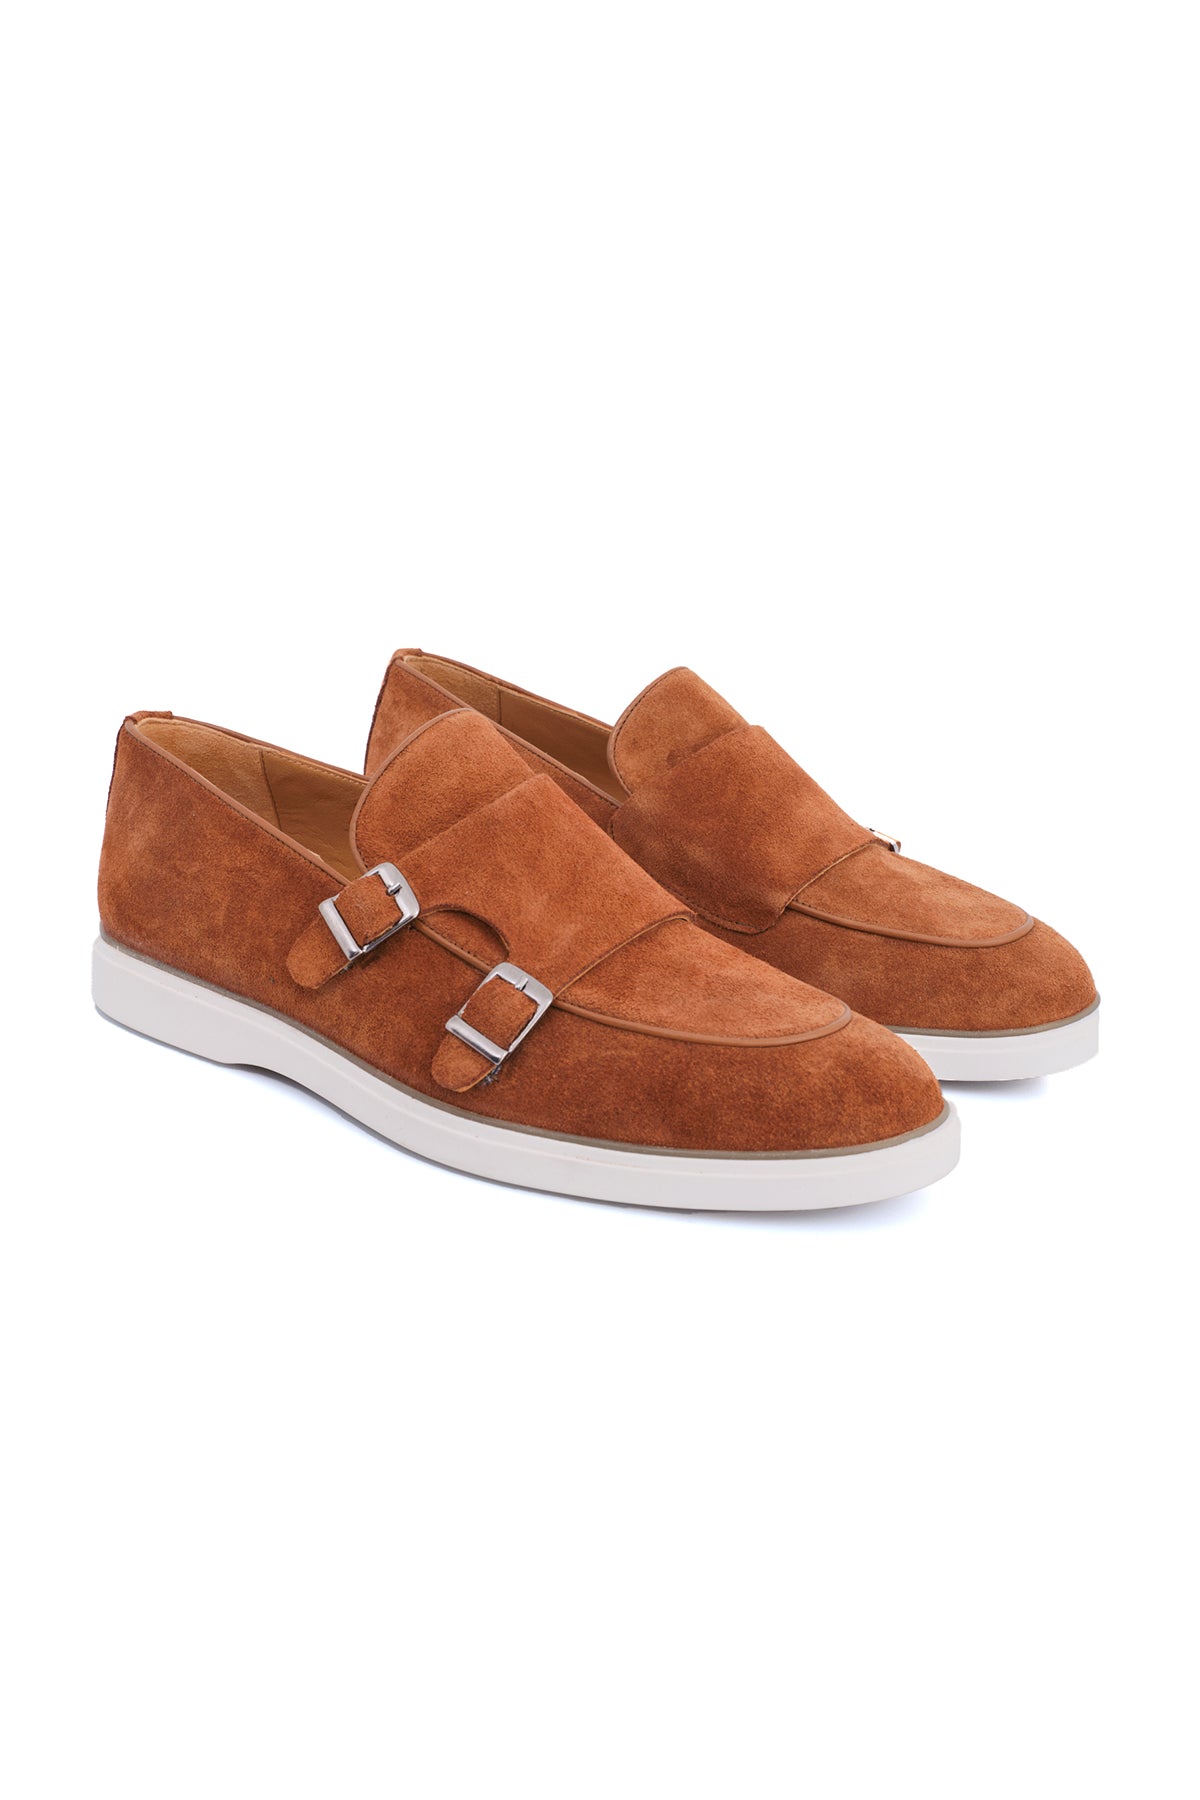 SUEDE DOUBLE MONK STRAPS ΤΑΜΠΑ.